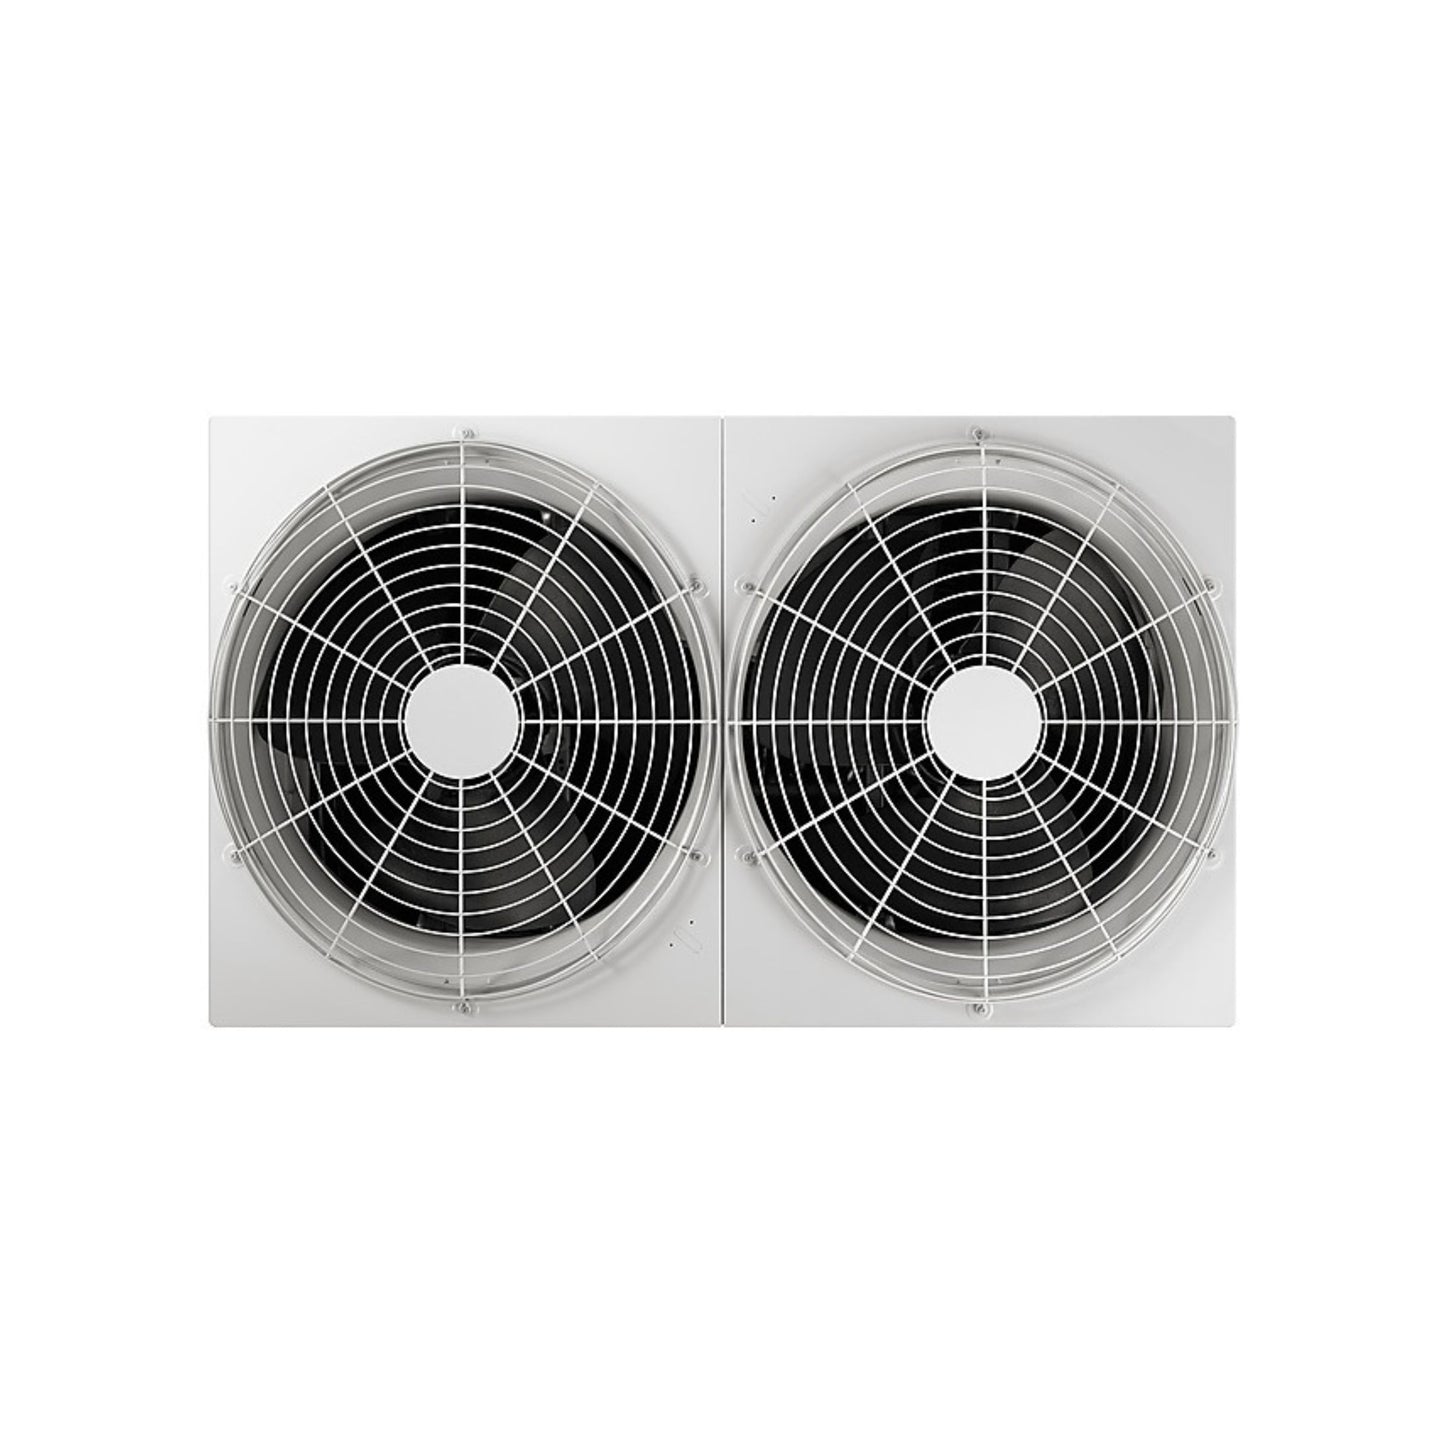 Samsung DVM S2 Standard Cooling Only Outdoor Unit Top View